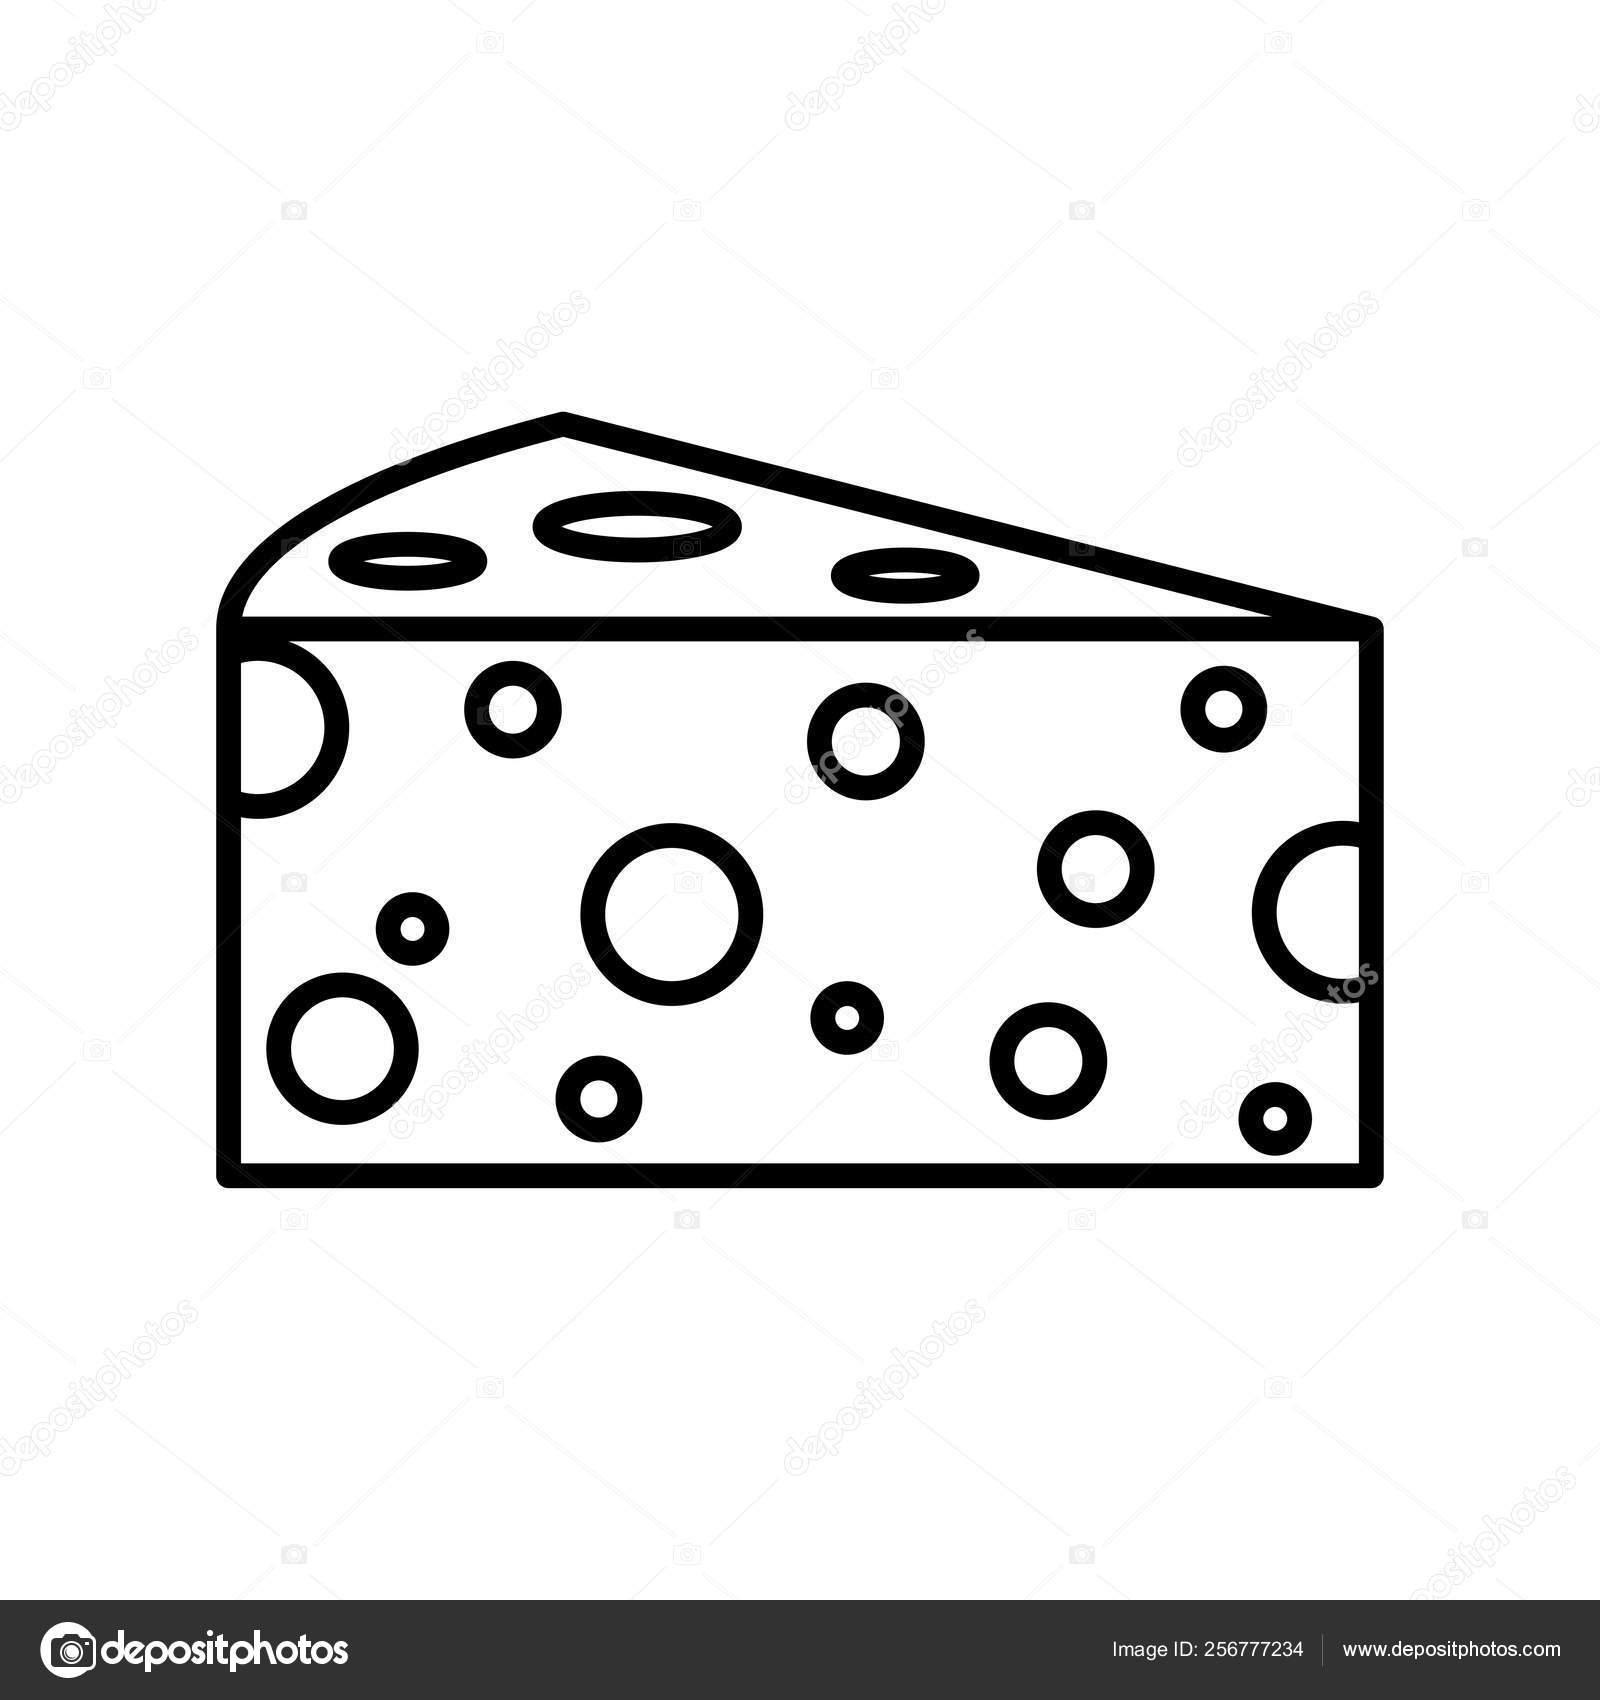 Cartoon Cheese Icon Isolated On White Background Stock Vector Image by  ©Aratehortua #256777234